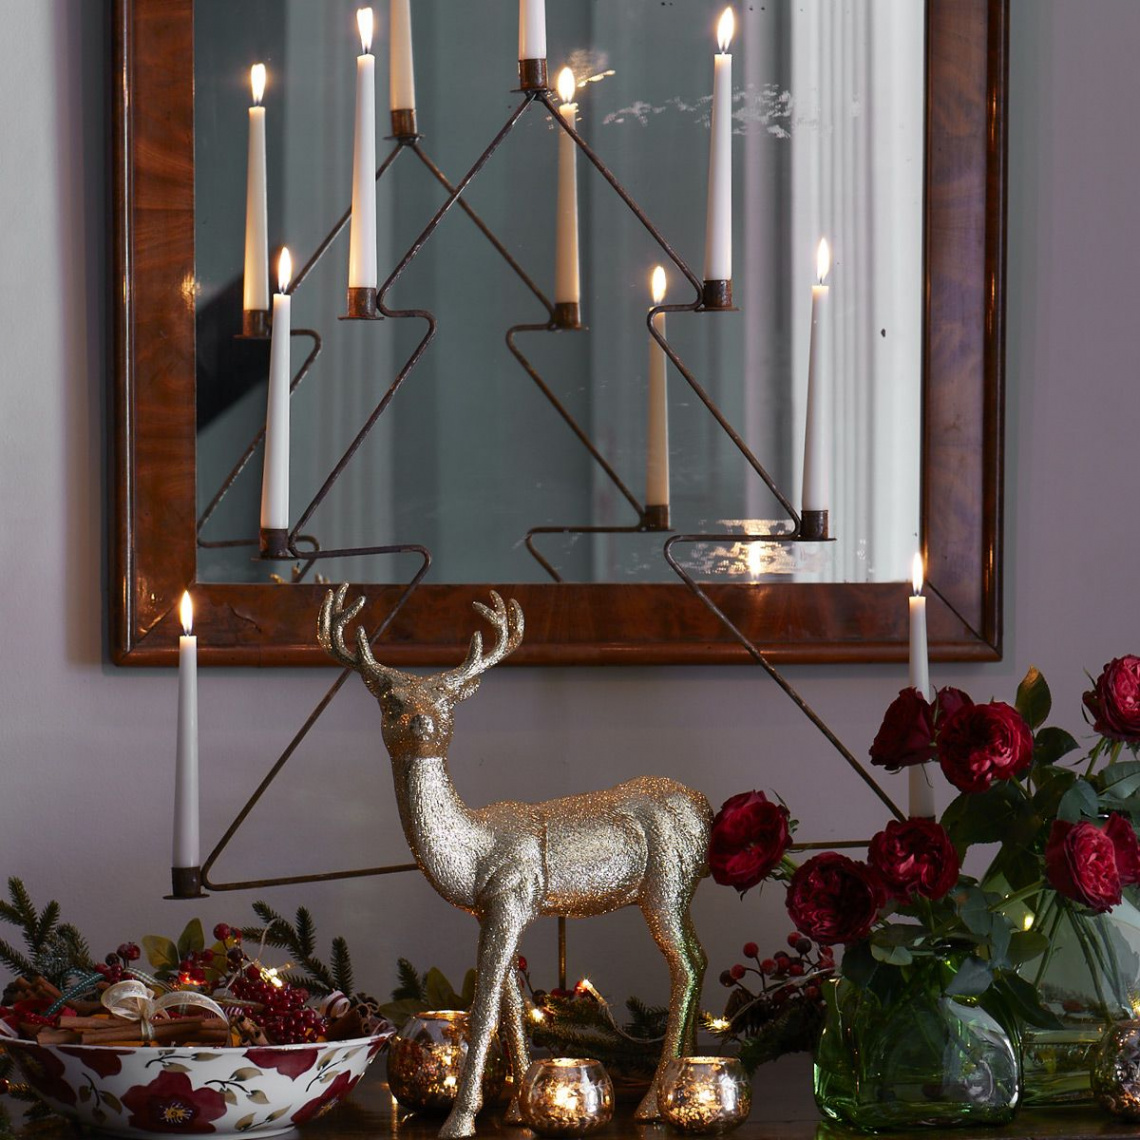 How to decorate your hall for Christmas - Christmas decor